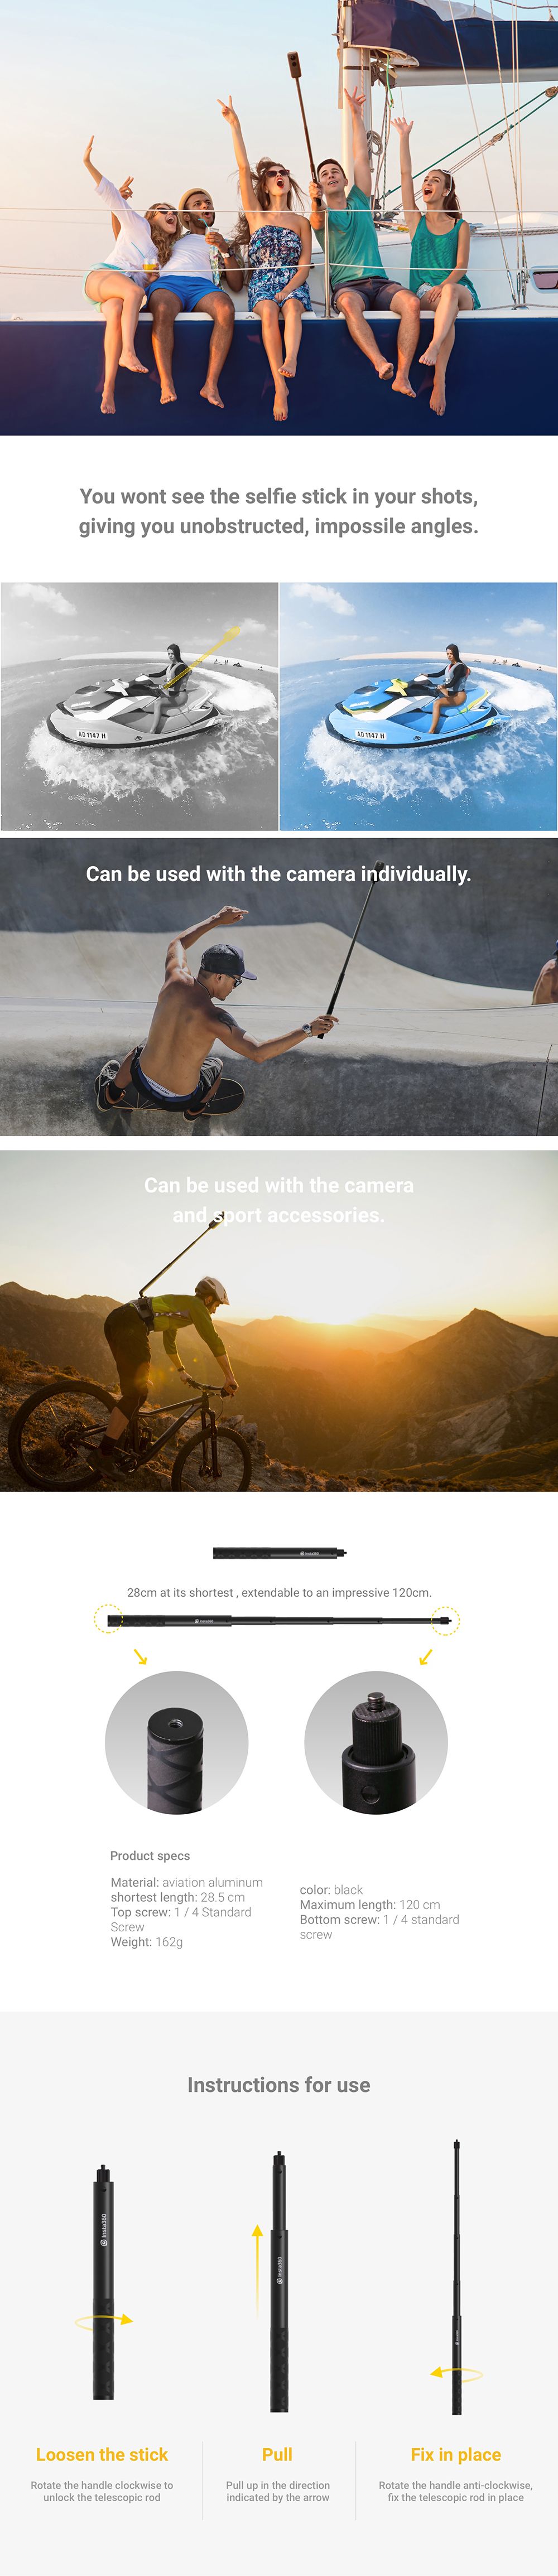 Insta360-ONE-X-X2-Accessories-Bullet-Time-Set-Handle-and-Selfie-Stick-Action-Camera-Handlebar-1368406